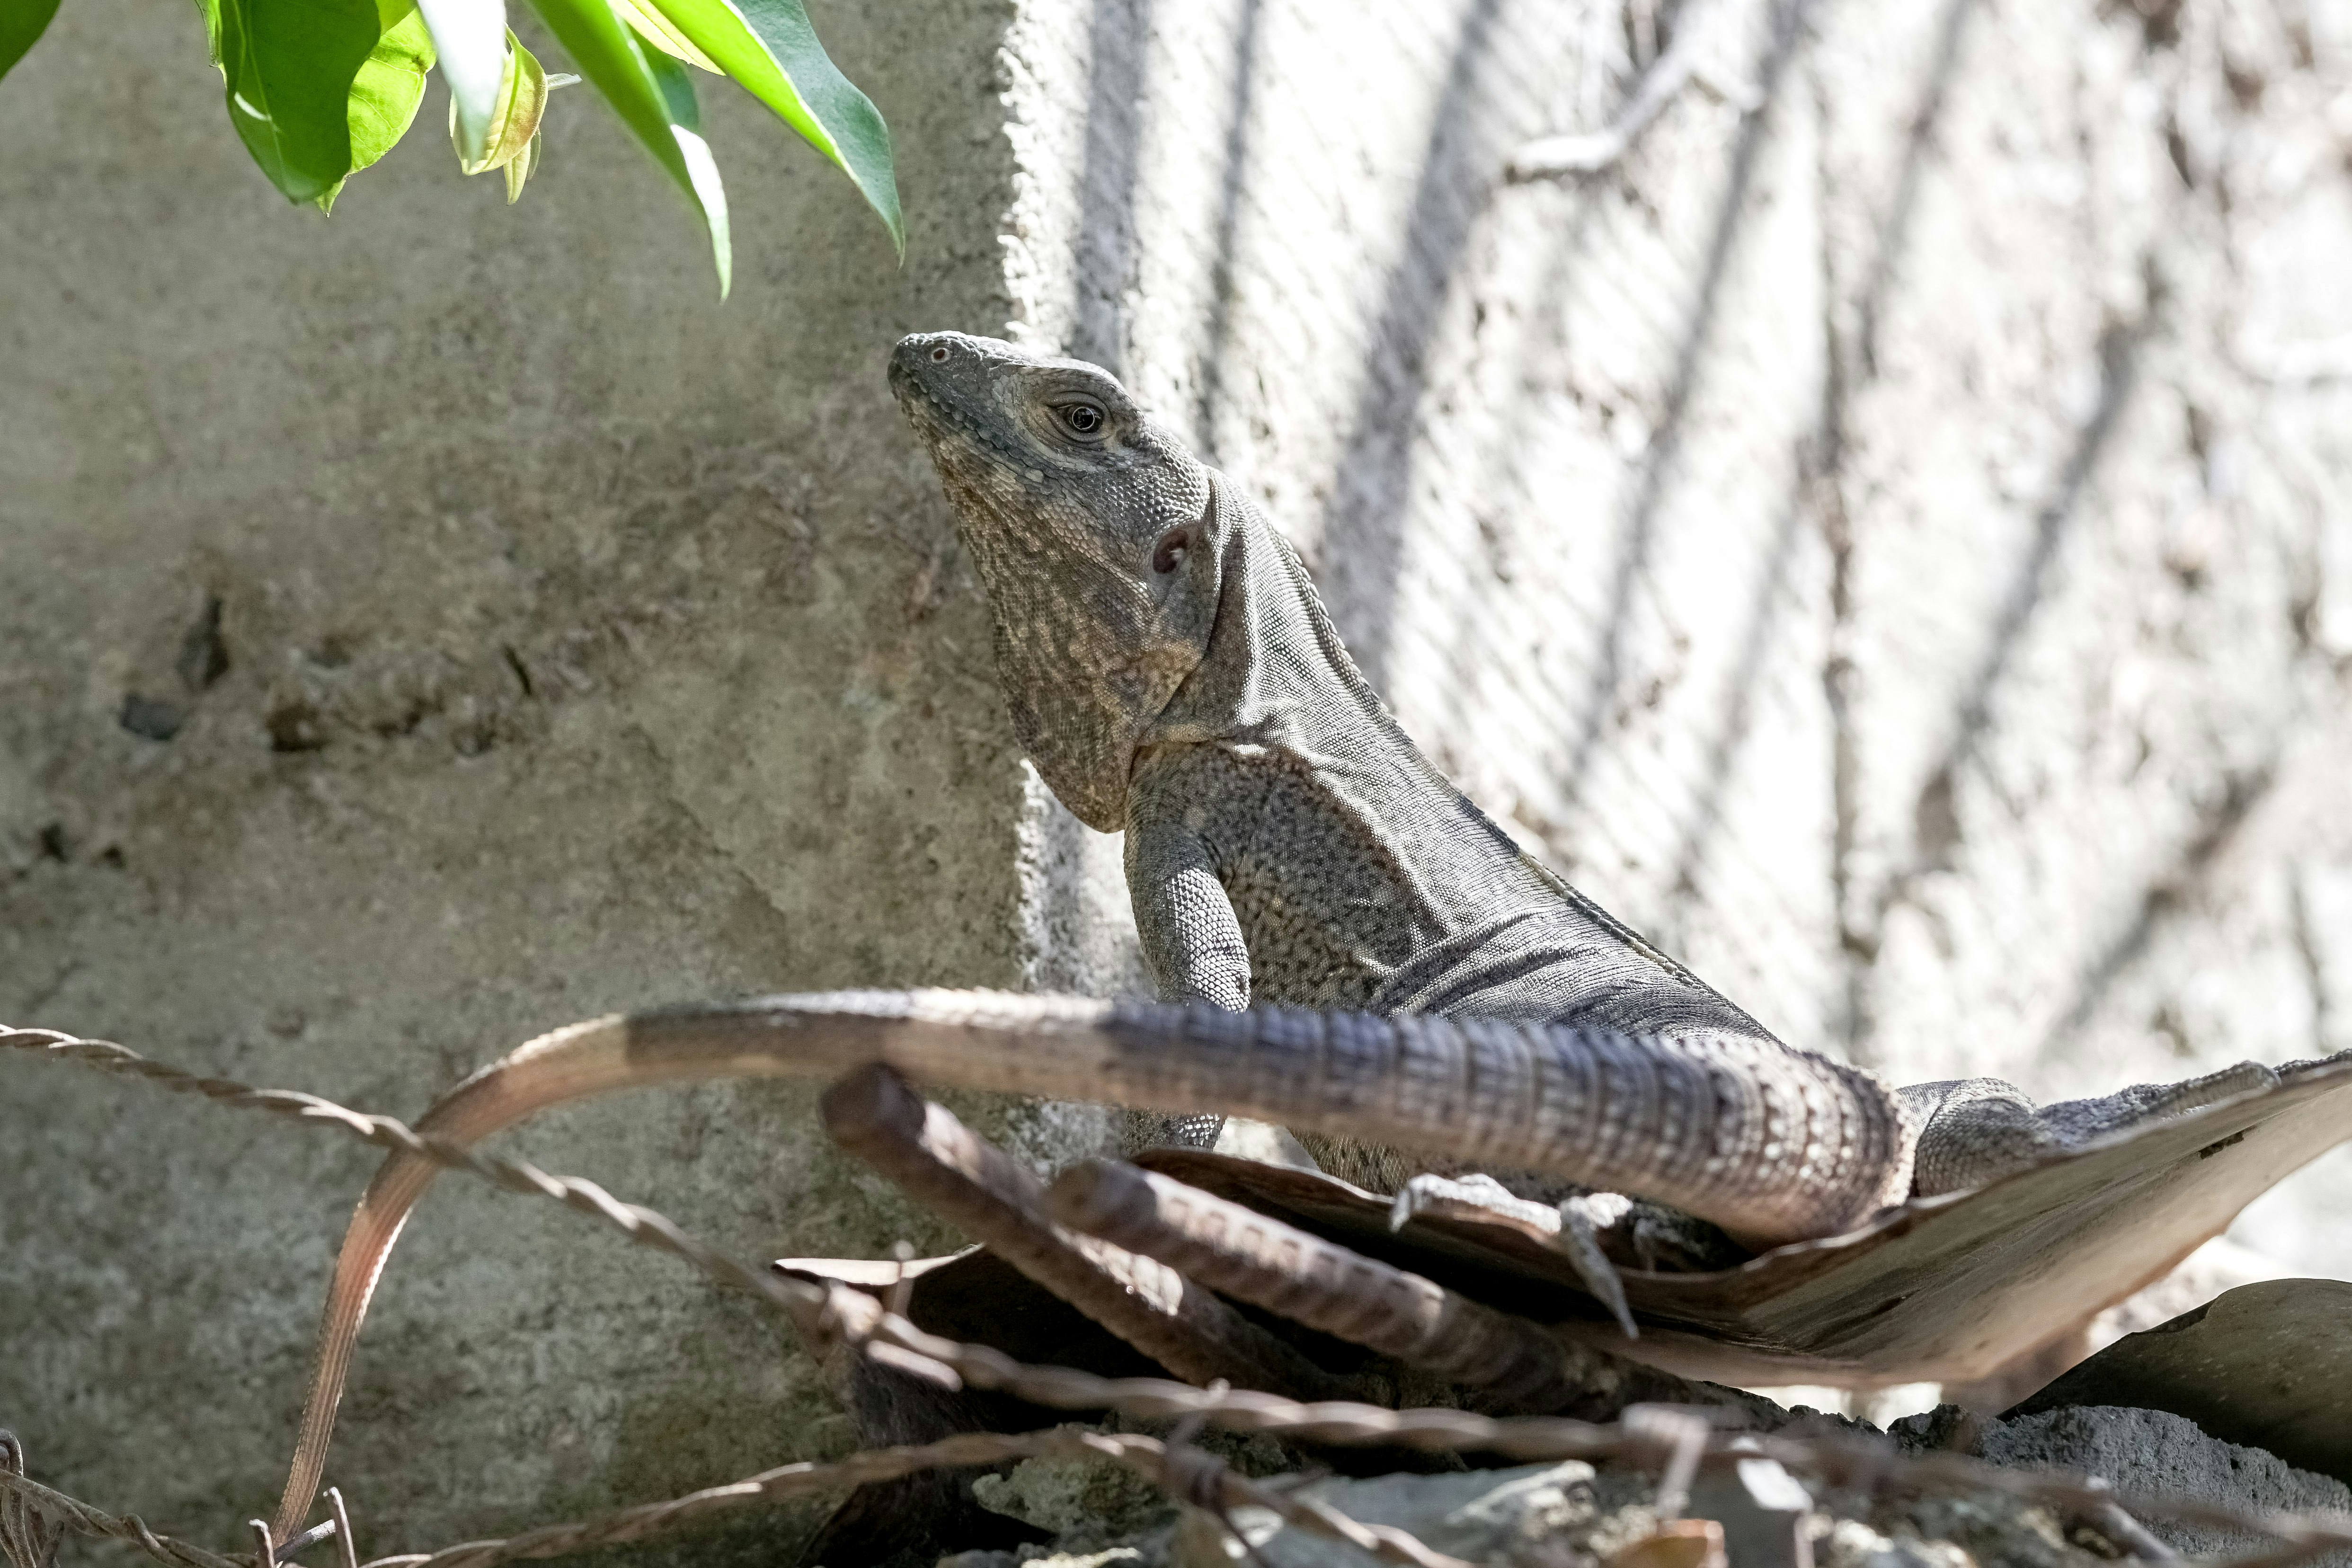 brown and gray lizard on brown wooden surface